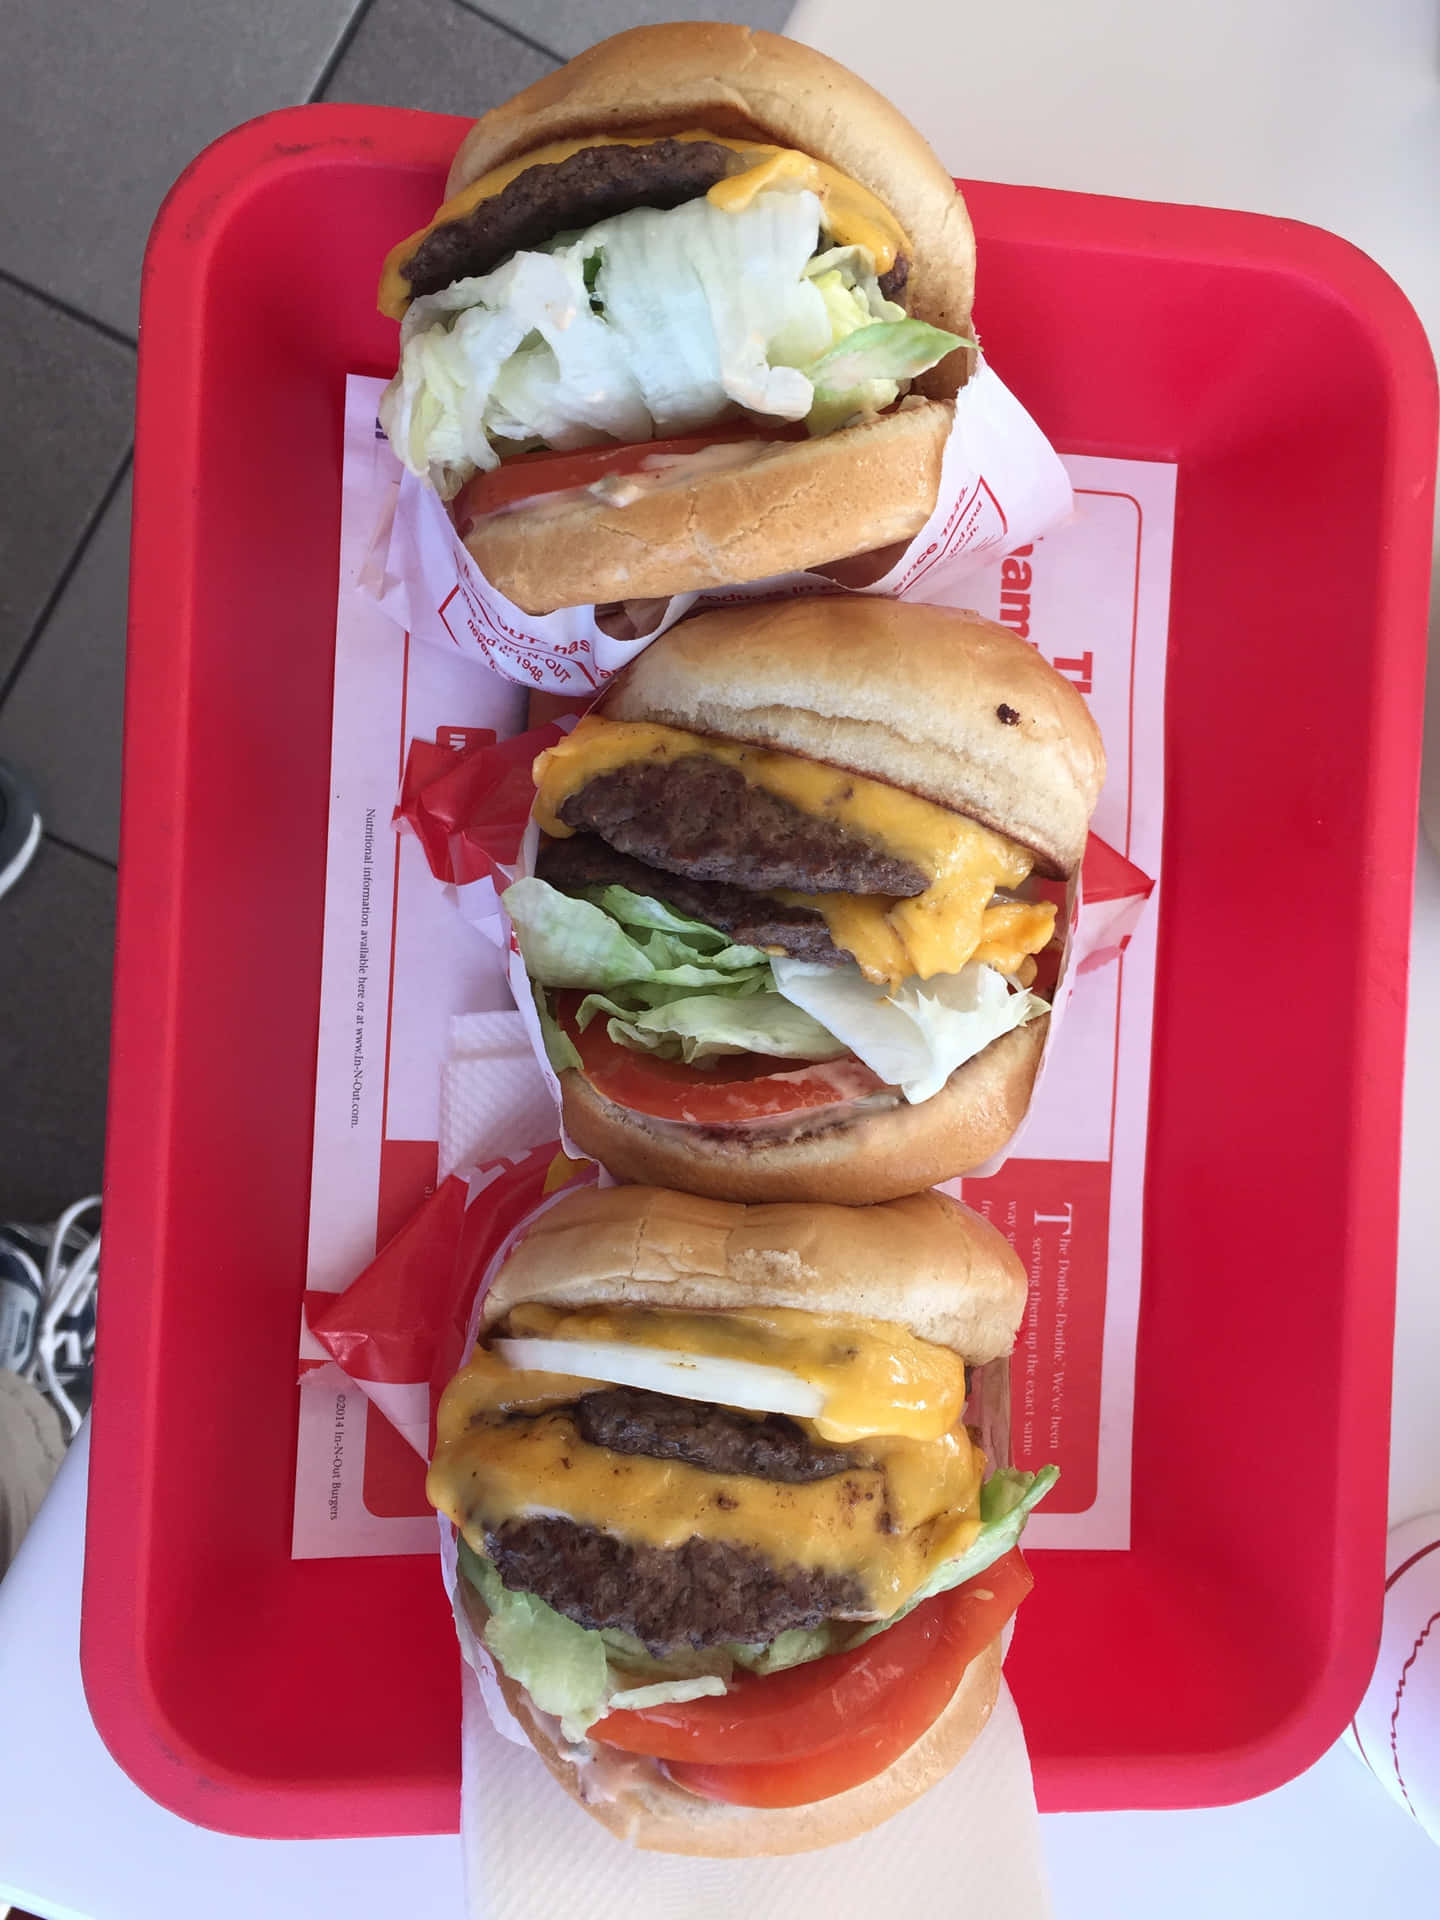 A Red Tray With Three Hamburgers On It Wallpaper